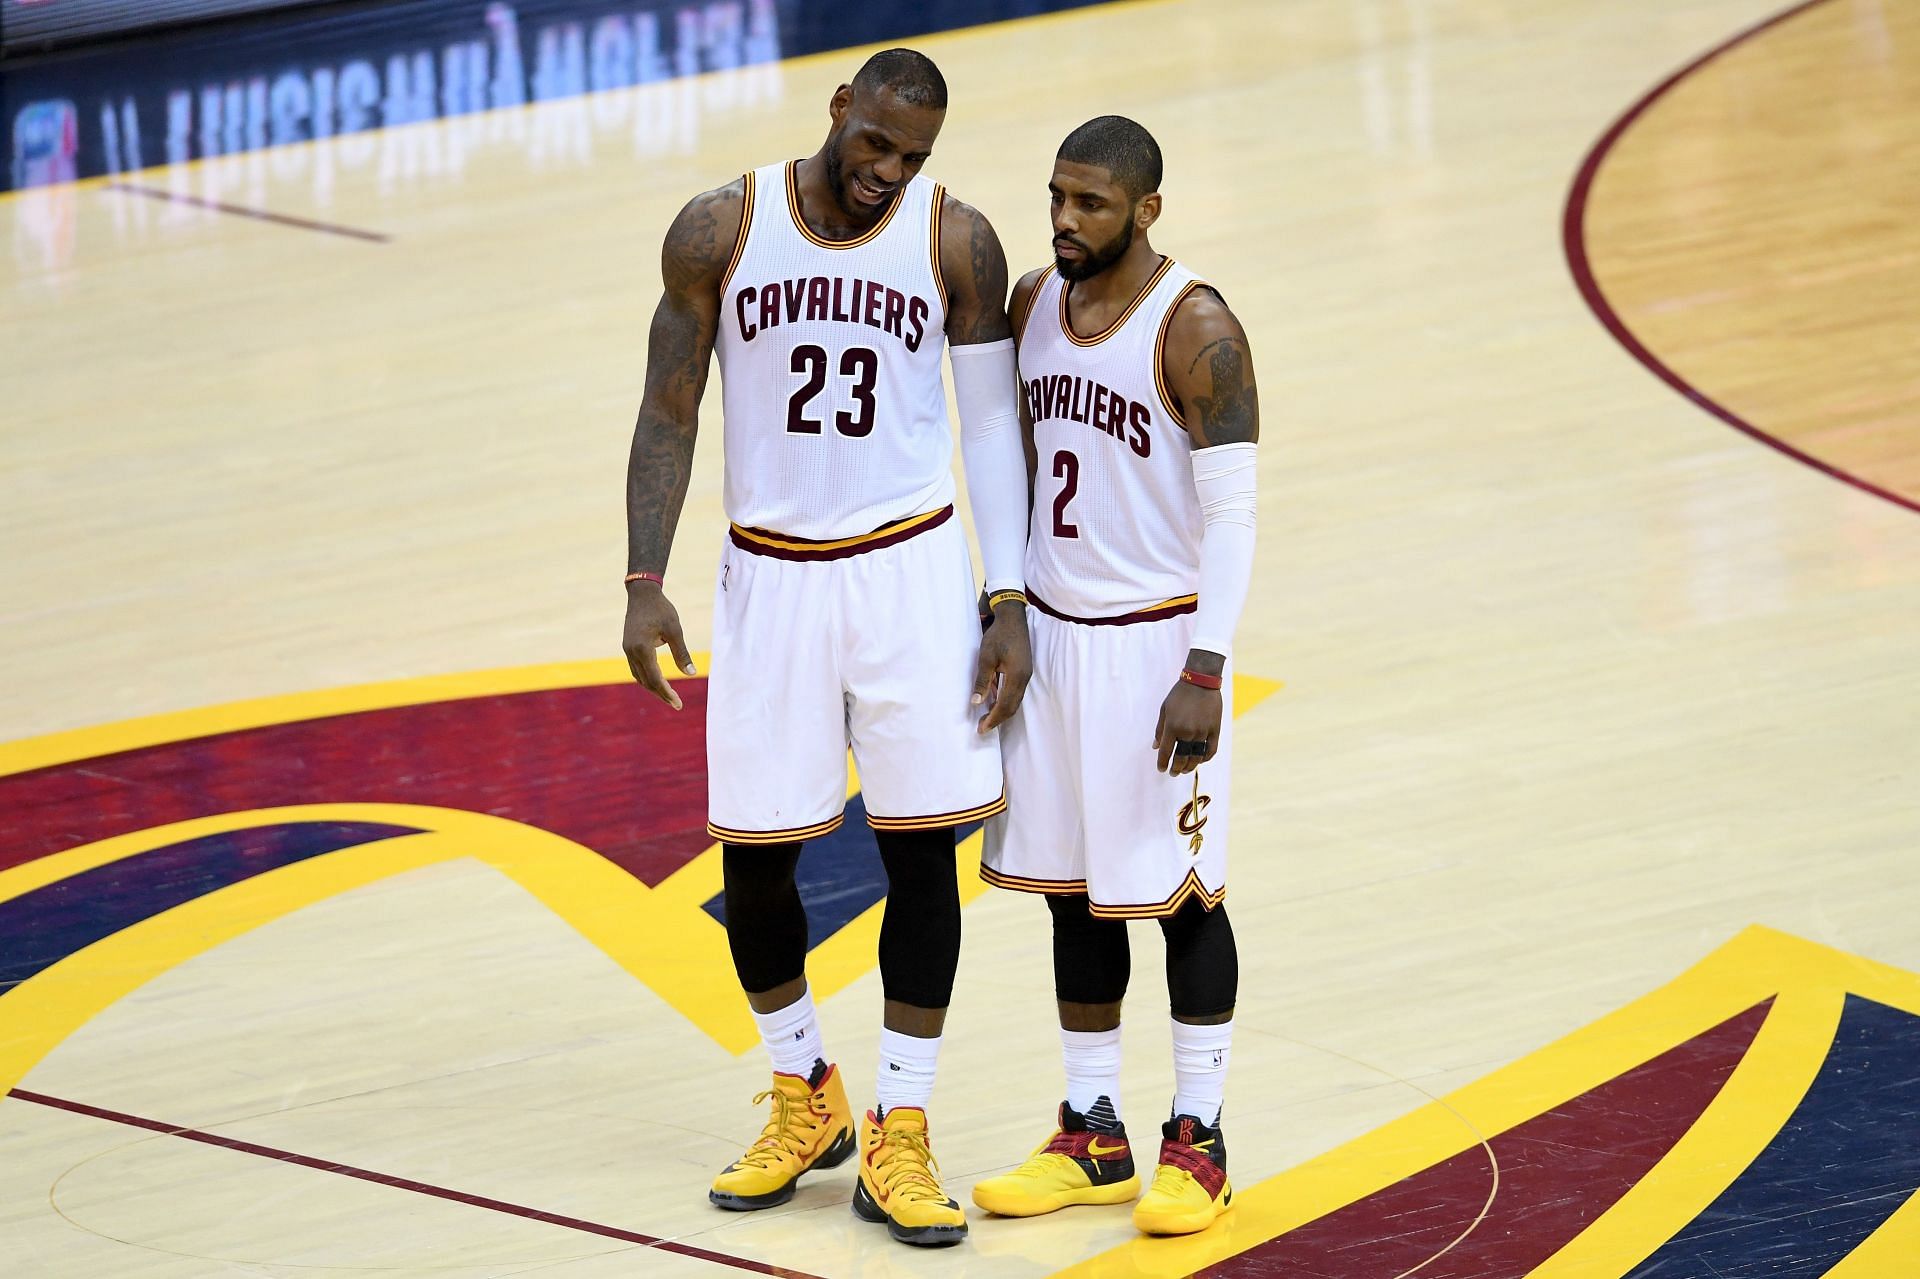 LeBron James and Kyrie Irving of the Cleveland Cavaliers.